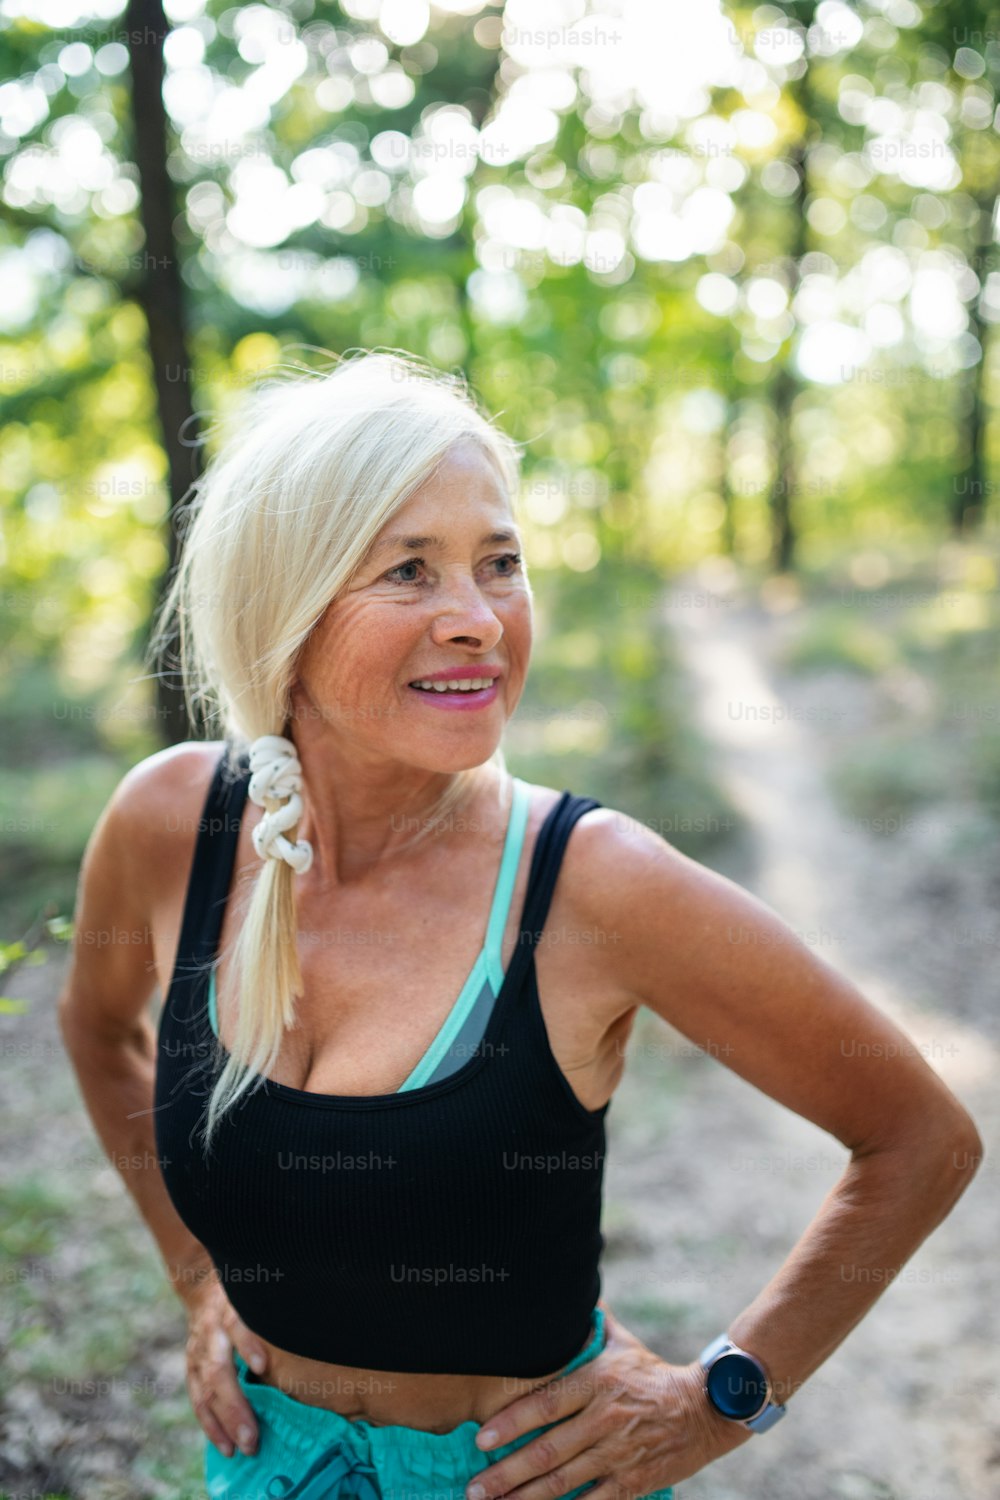 A portrait of active senior woman runner standing outdoors in forest.